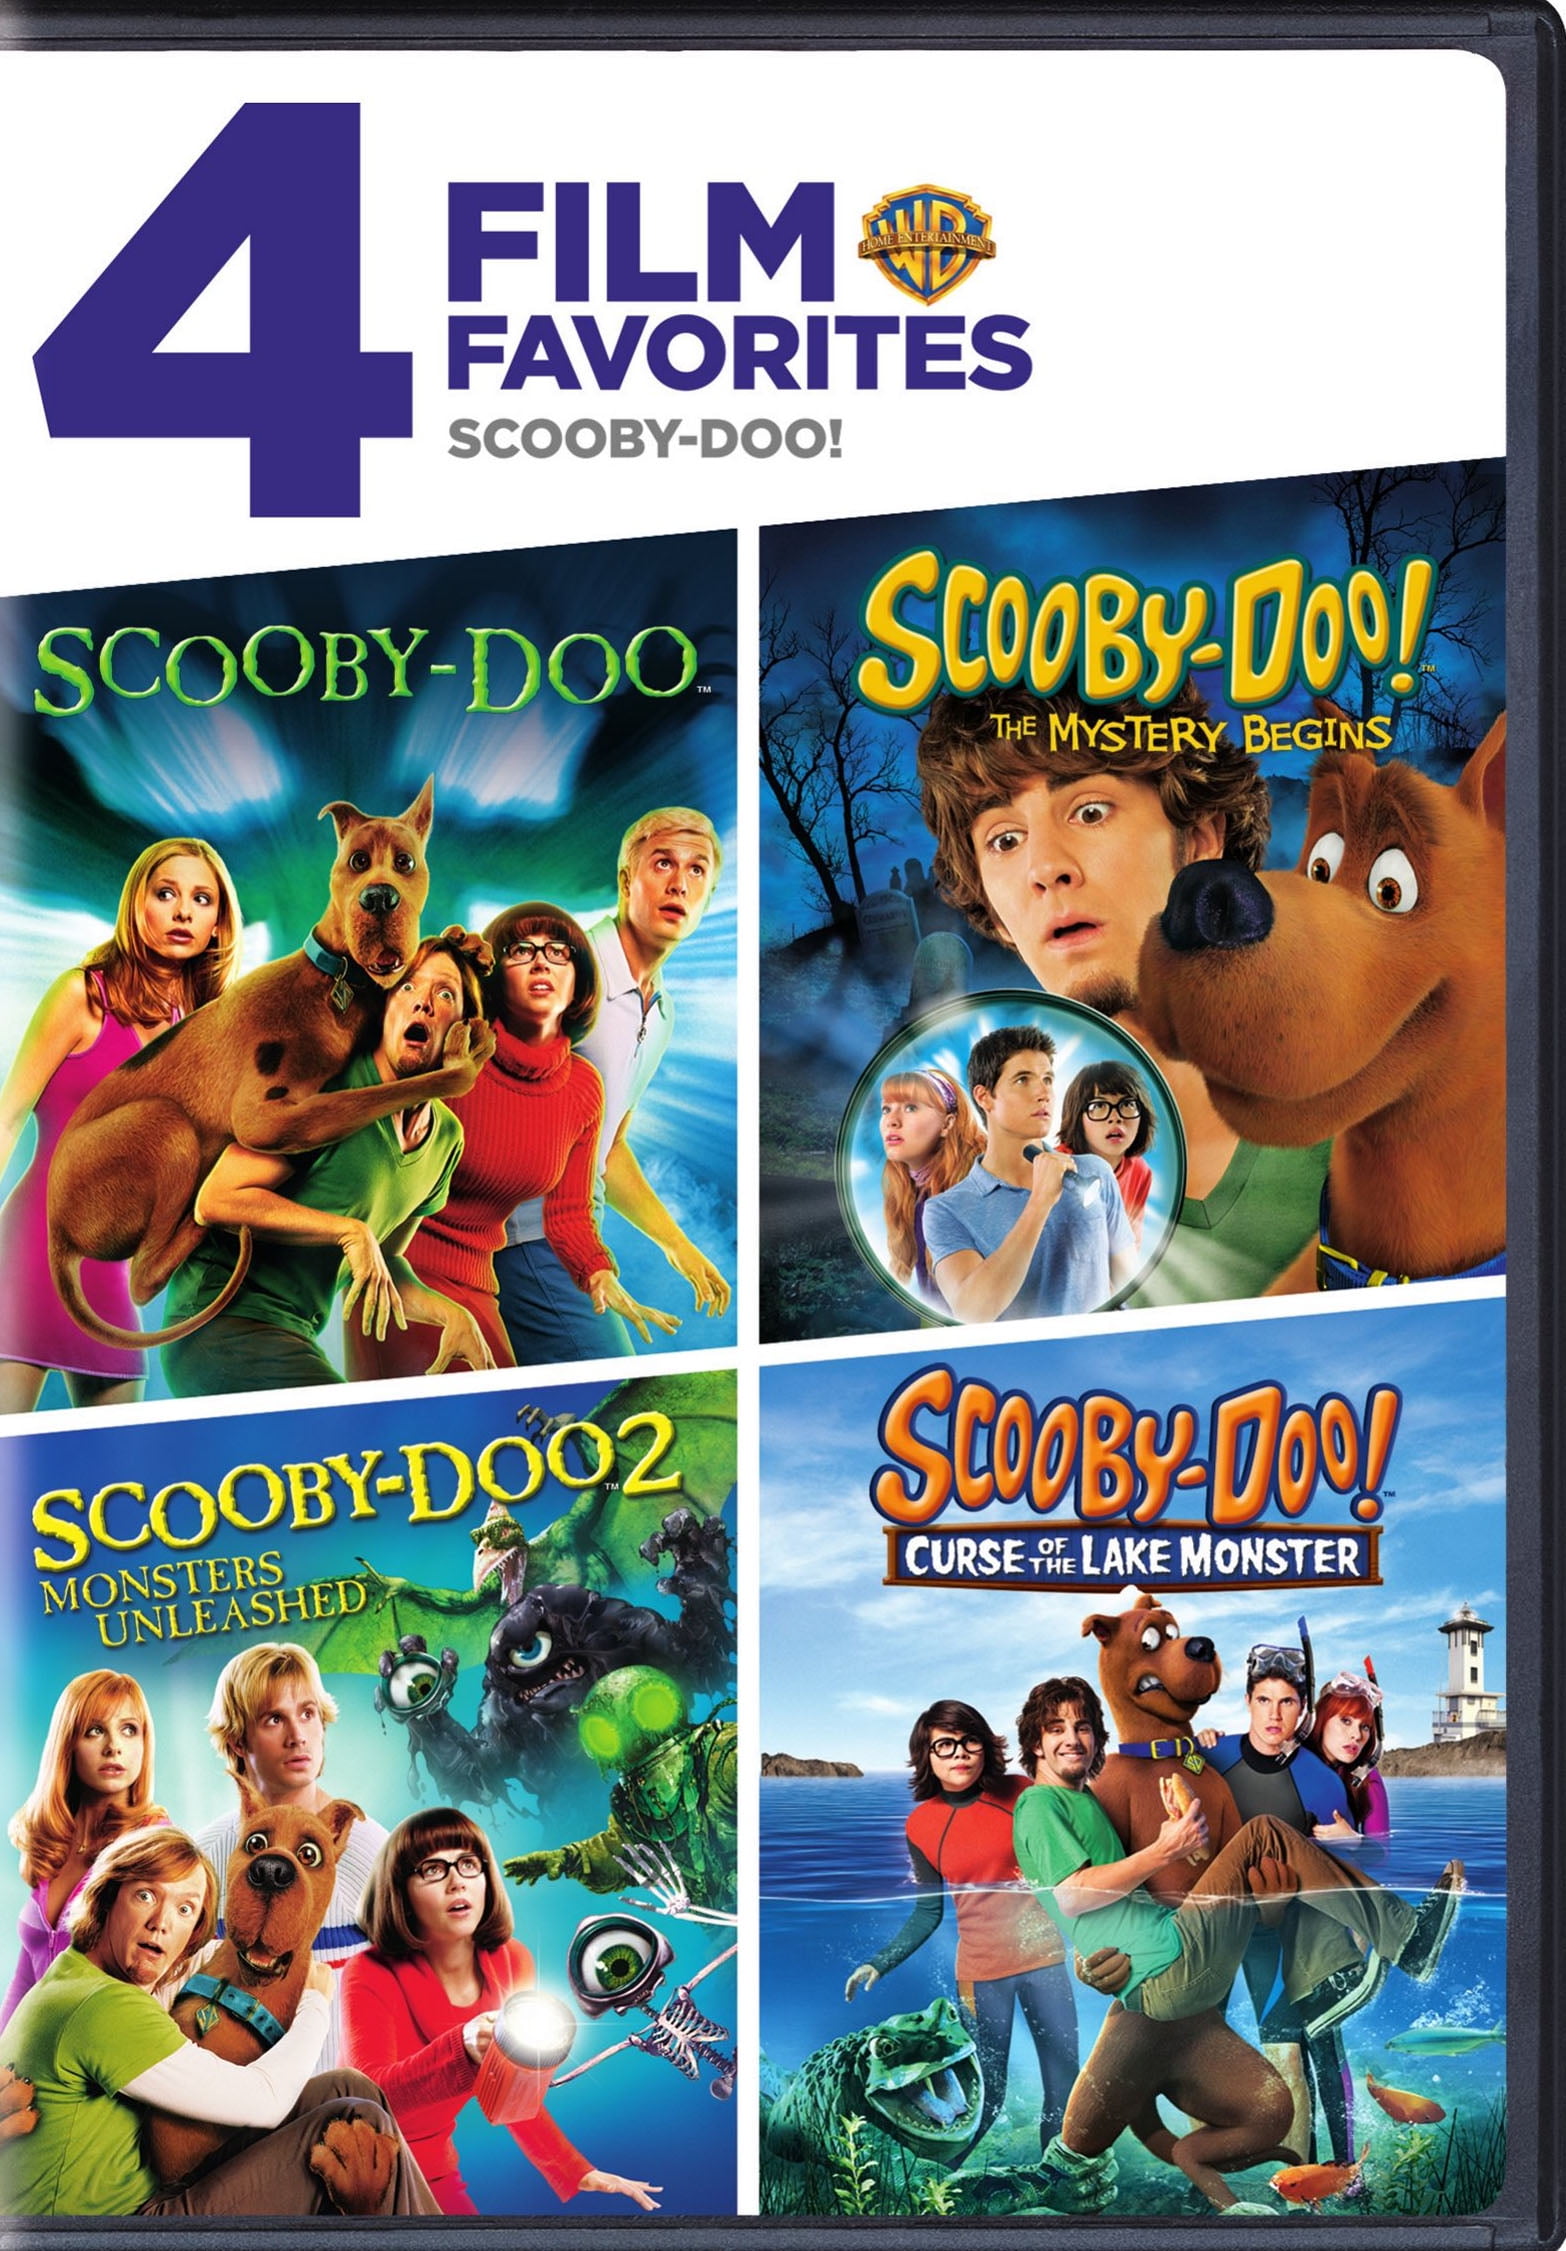 4 Film Favorites: Scooby-Doo! (Scooby-Doo! / Scooby-Doo! 2: Monsters Unleashed / Scooby-Doo! Curse of the Lake Monster / Scooby-Doo! The Mystery Begins) (DVD)